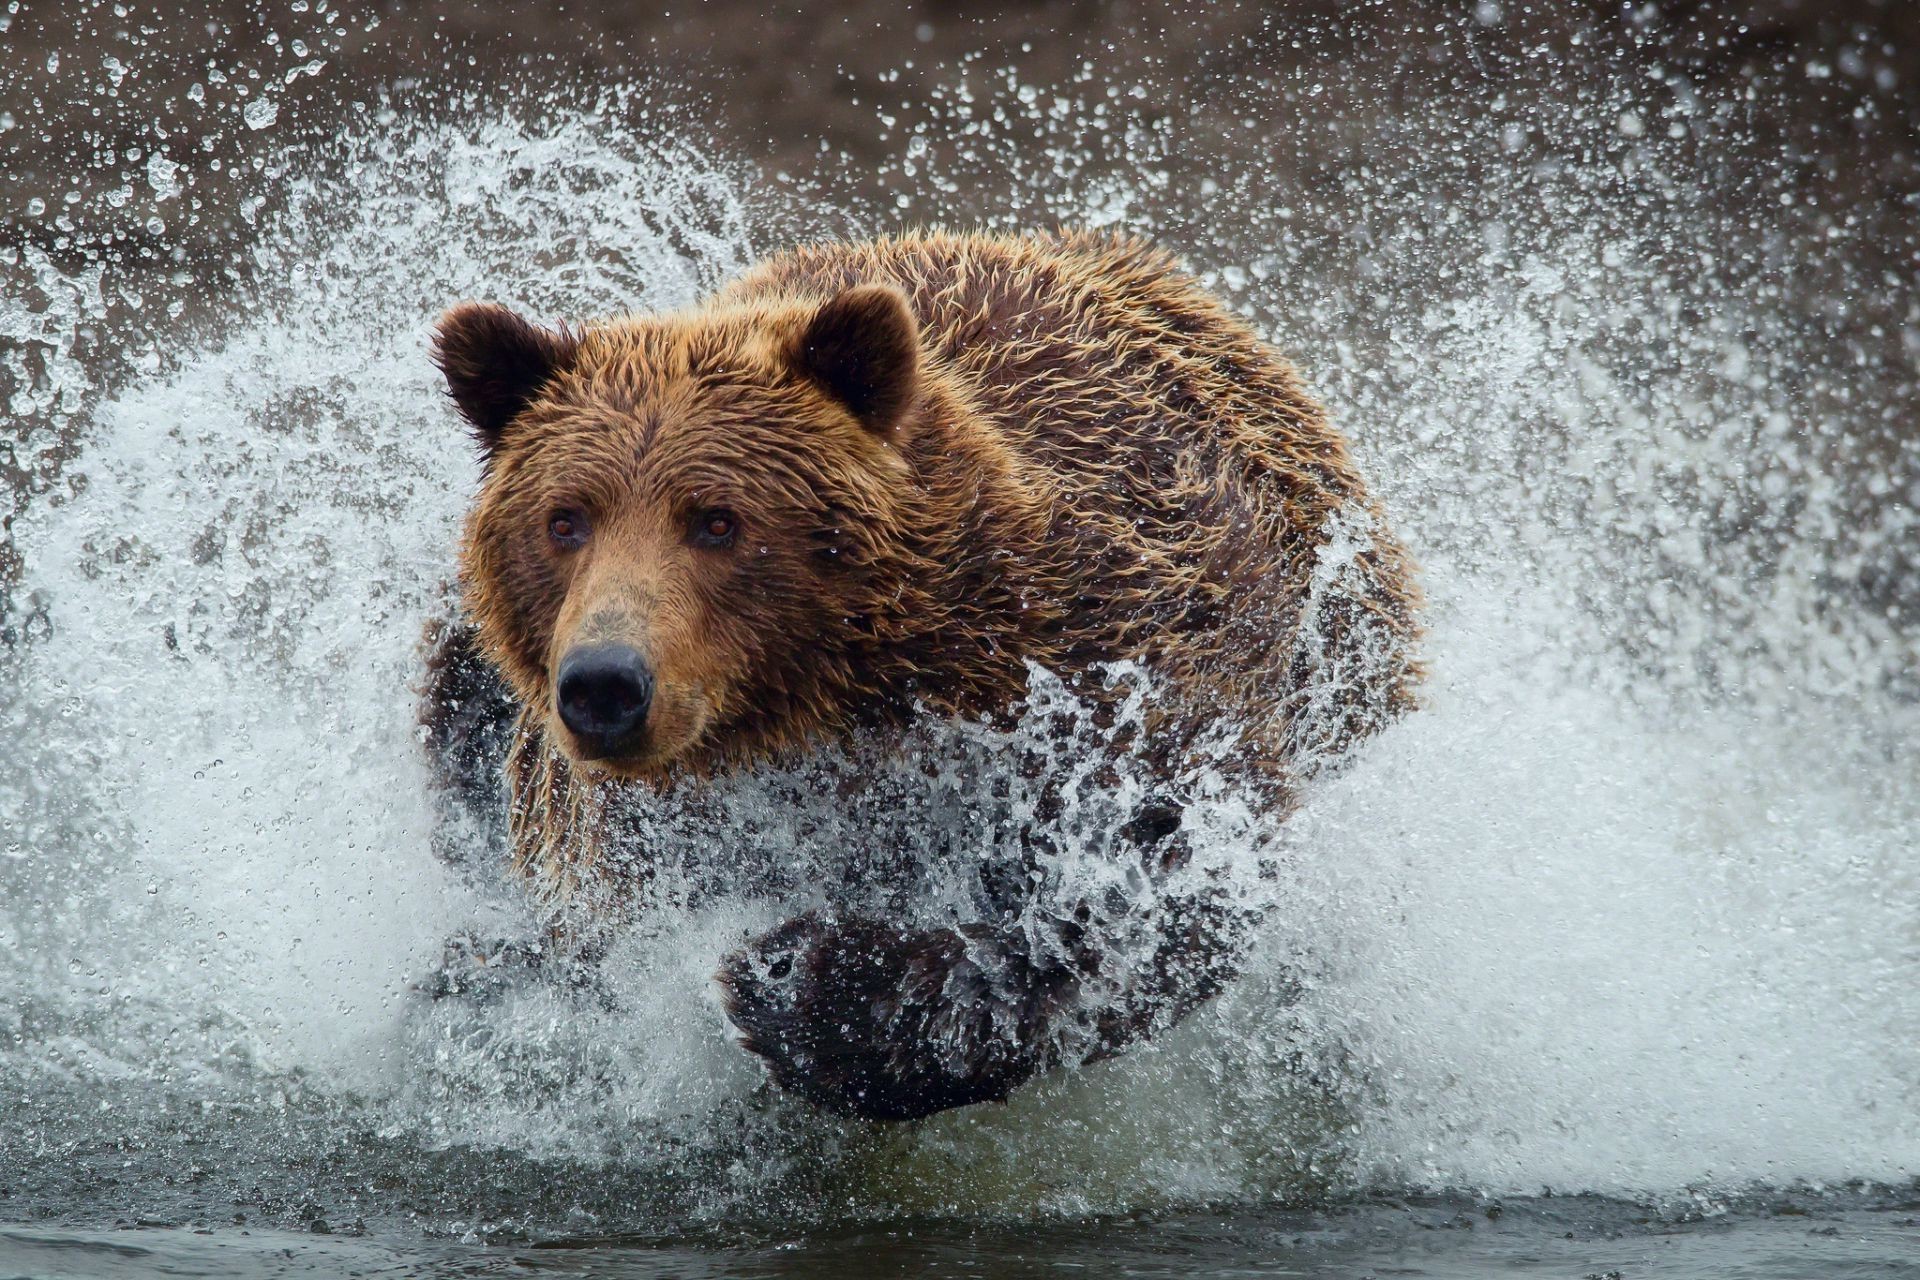 bears water nature outdoors mammal wet grizzly wildlife power